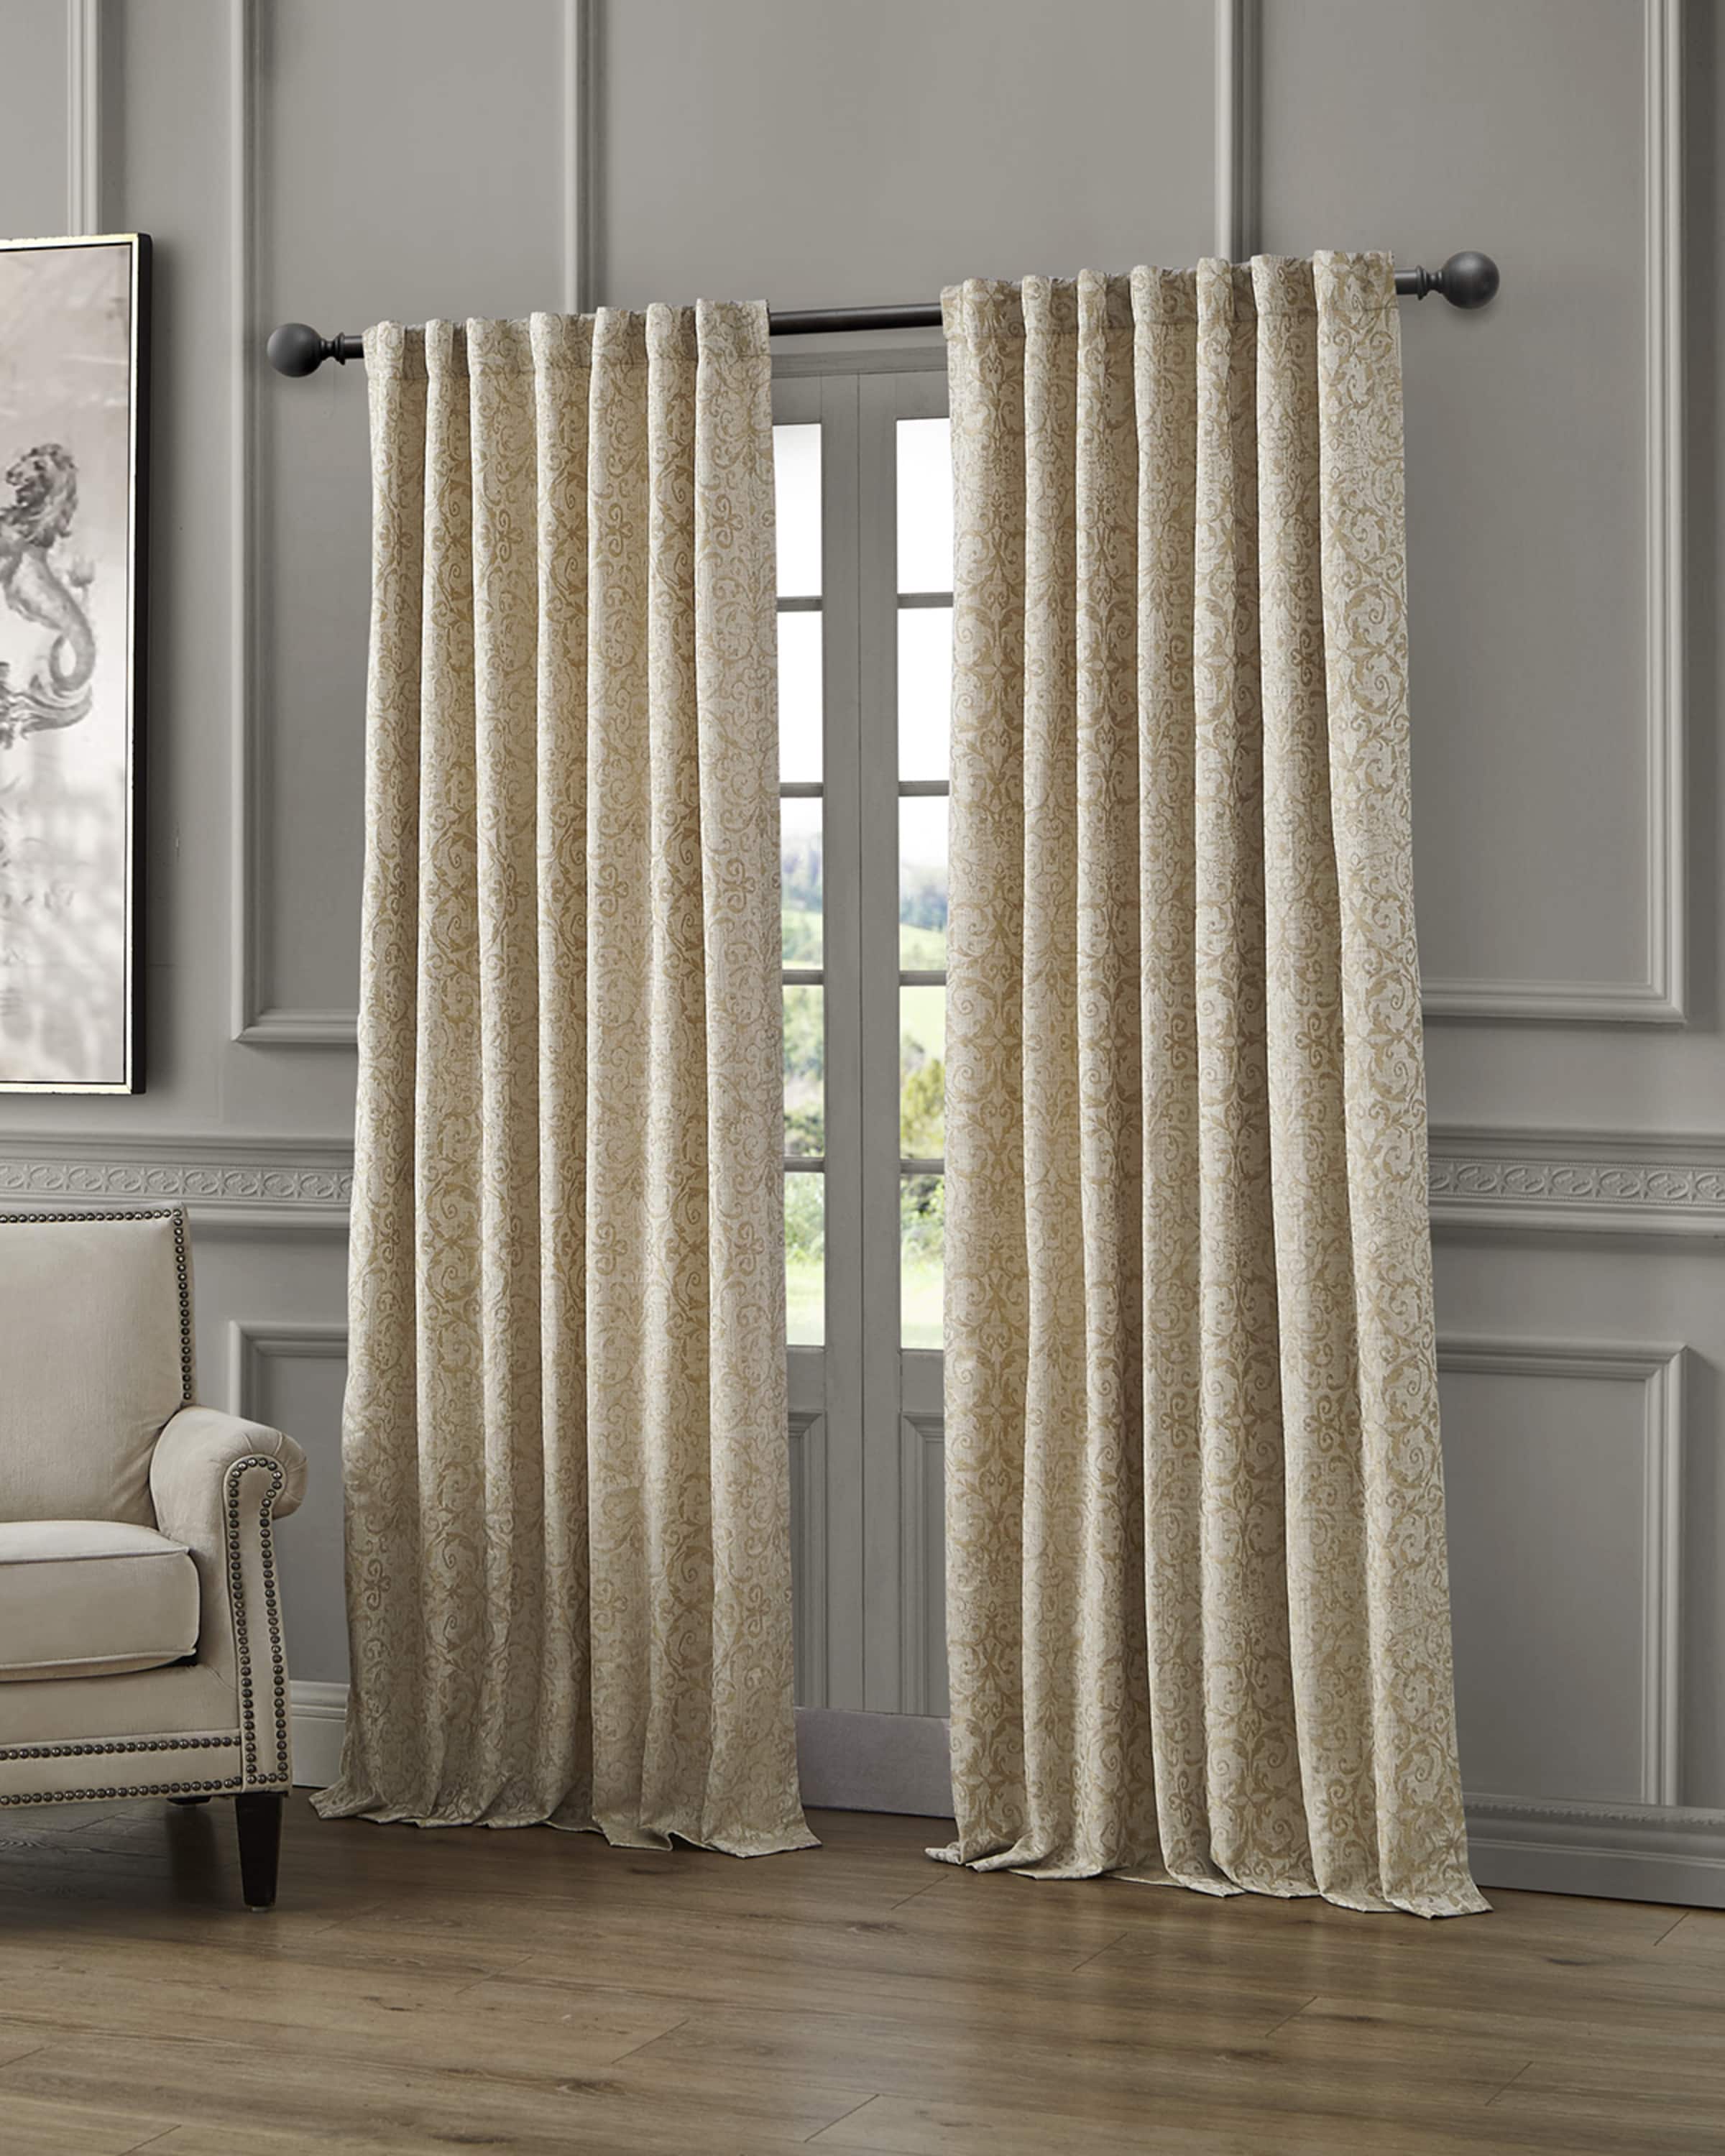 Waterford Renly Back Tab Curtain Panel, 96"